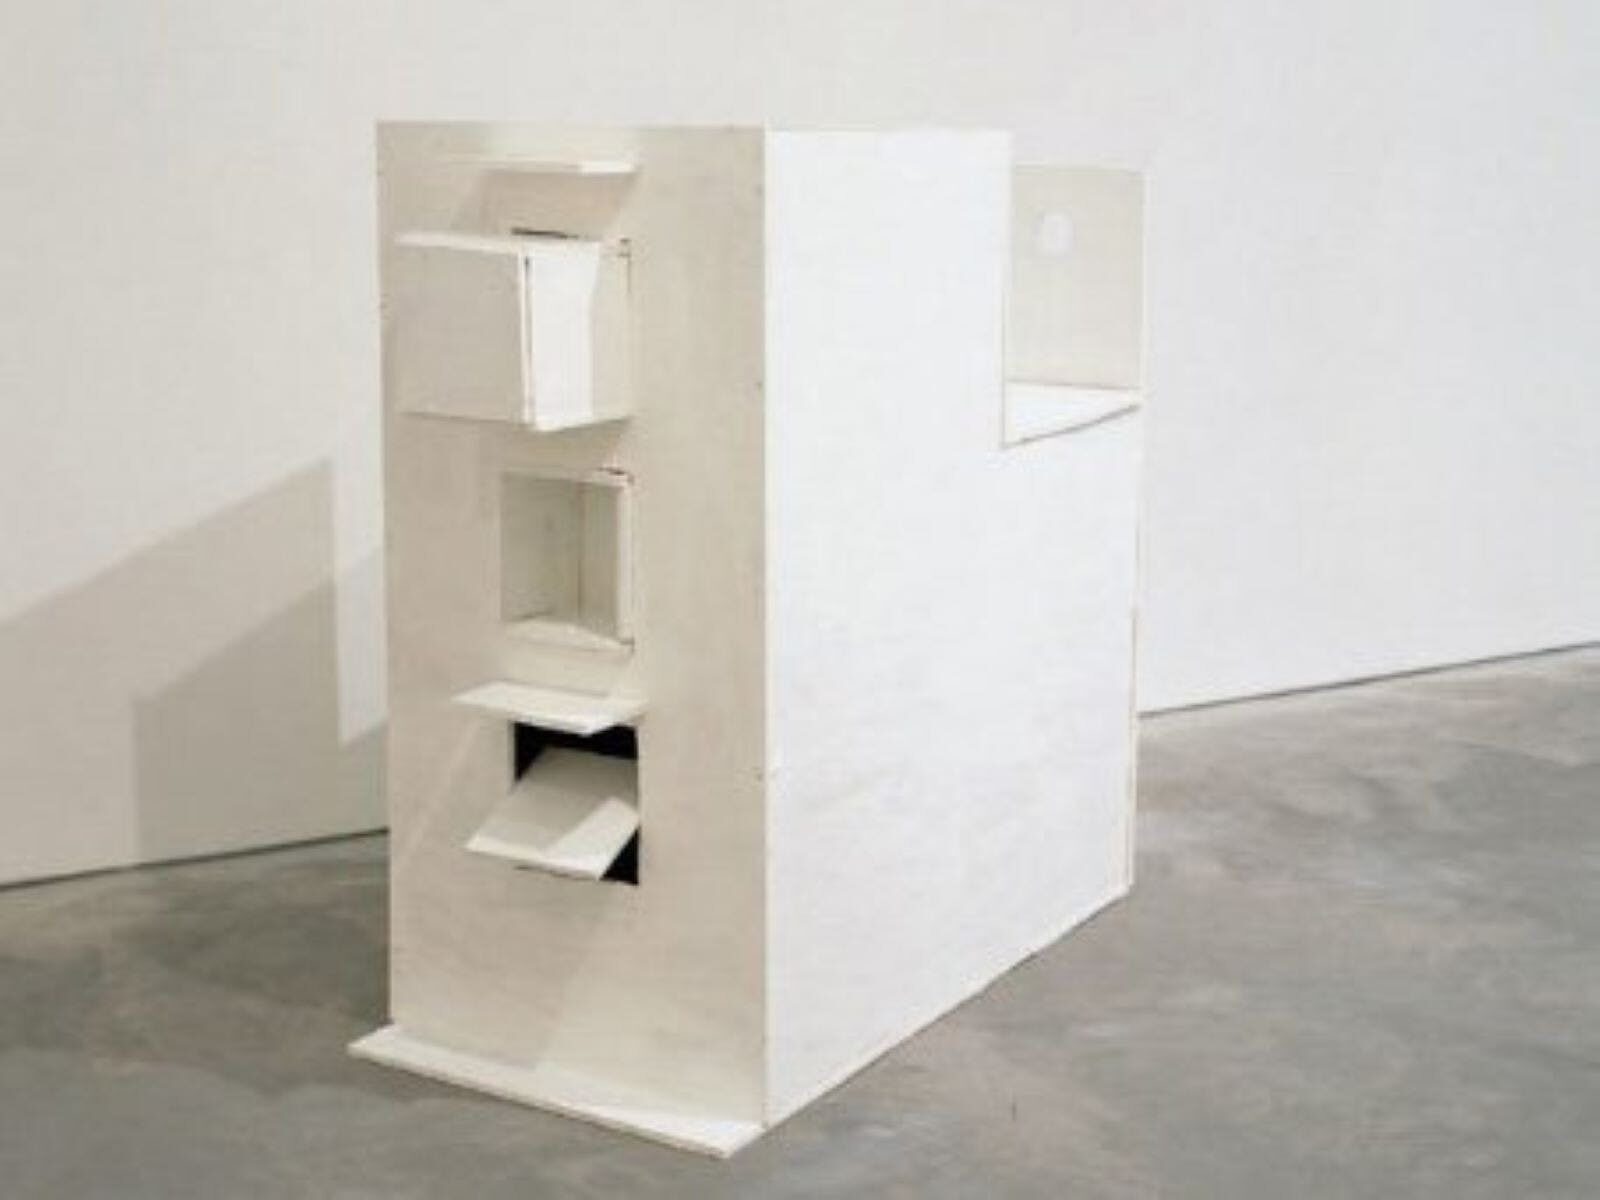 A white wooden sculptor of a building on concrete floor, against a white wall